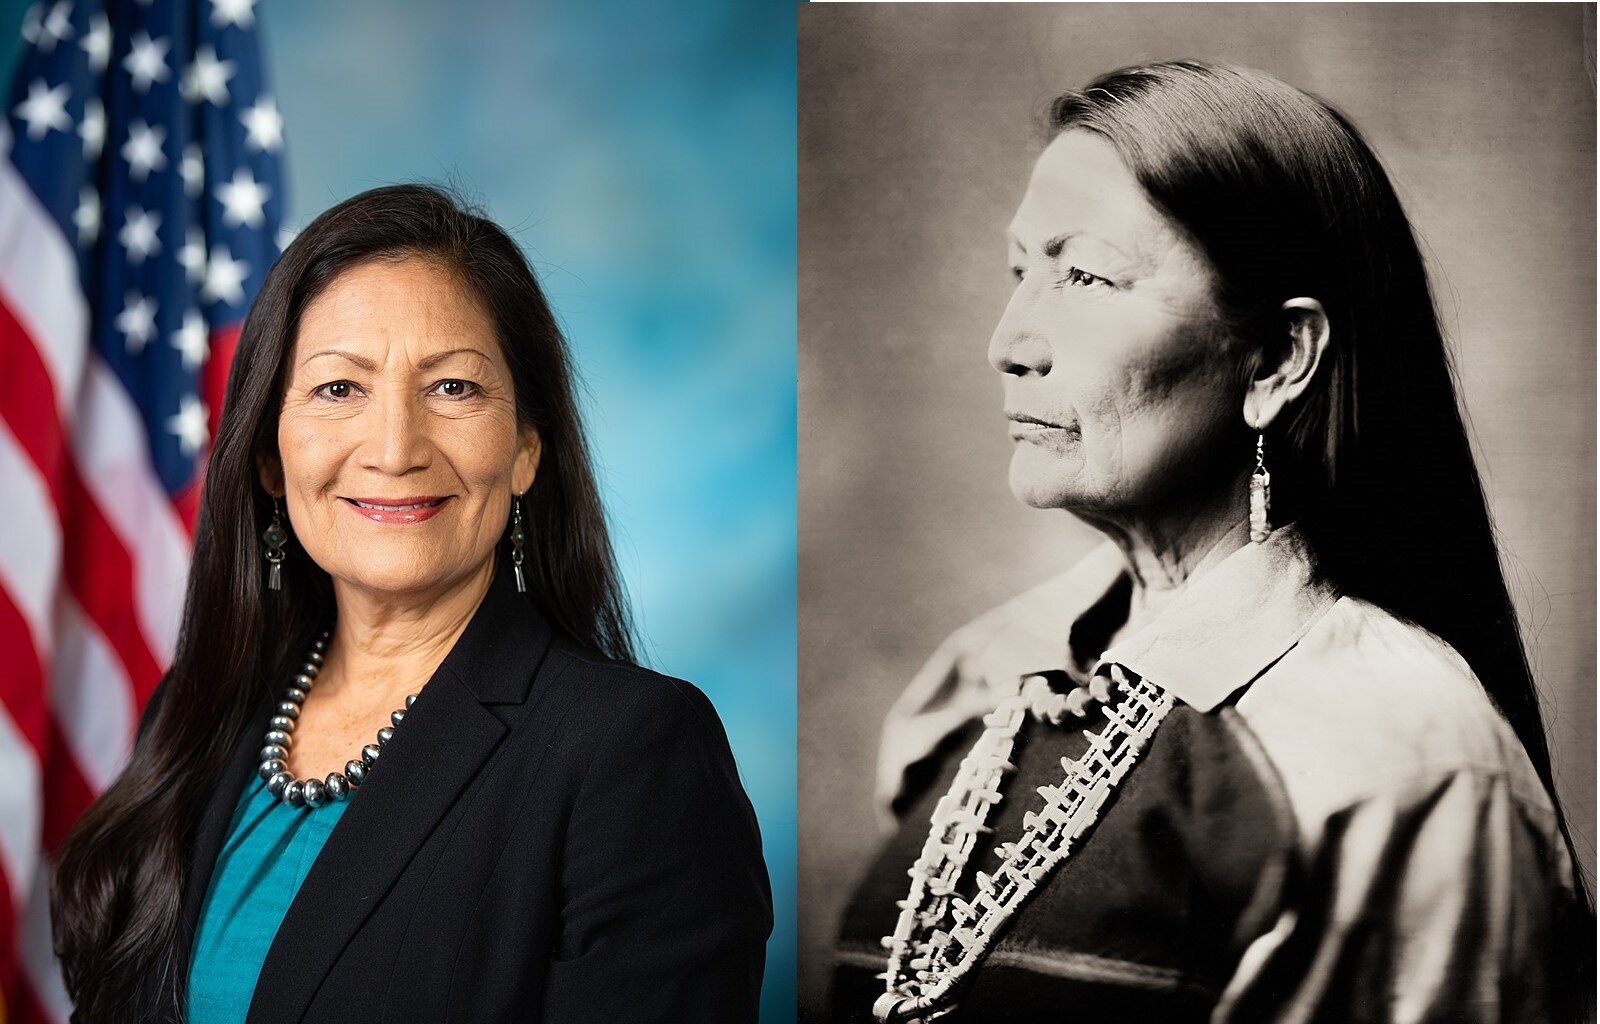 PICTURED: Sec. of the Interior Debra Haaland was selected by Joe Biden, according to many people’s beliefs, for her ability to carry out the American the Beautiful/30x30 executive order.Congresswoman Debra Haaland, or “Crushed Turquoise” of the Laguna Pueblo, New Mexico’s 1st District, captured in the historic wet plate collodion process of pure silver on glass for “Northern Plains Native Americans: A Modern Wet Plate Perspective”. Photo credit: Shane Balkowitsch. CC 4.0.